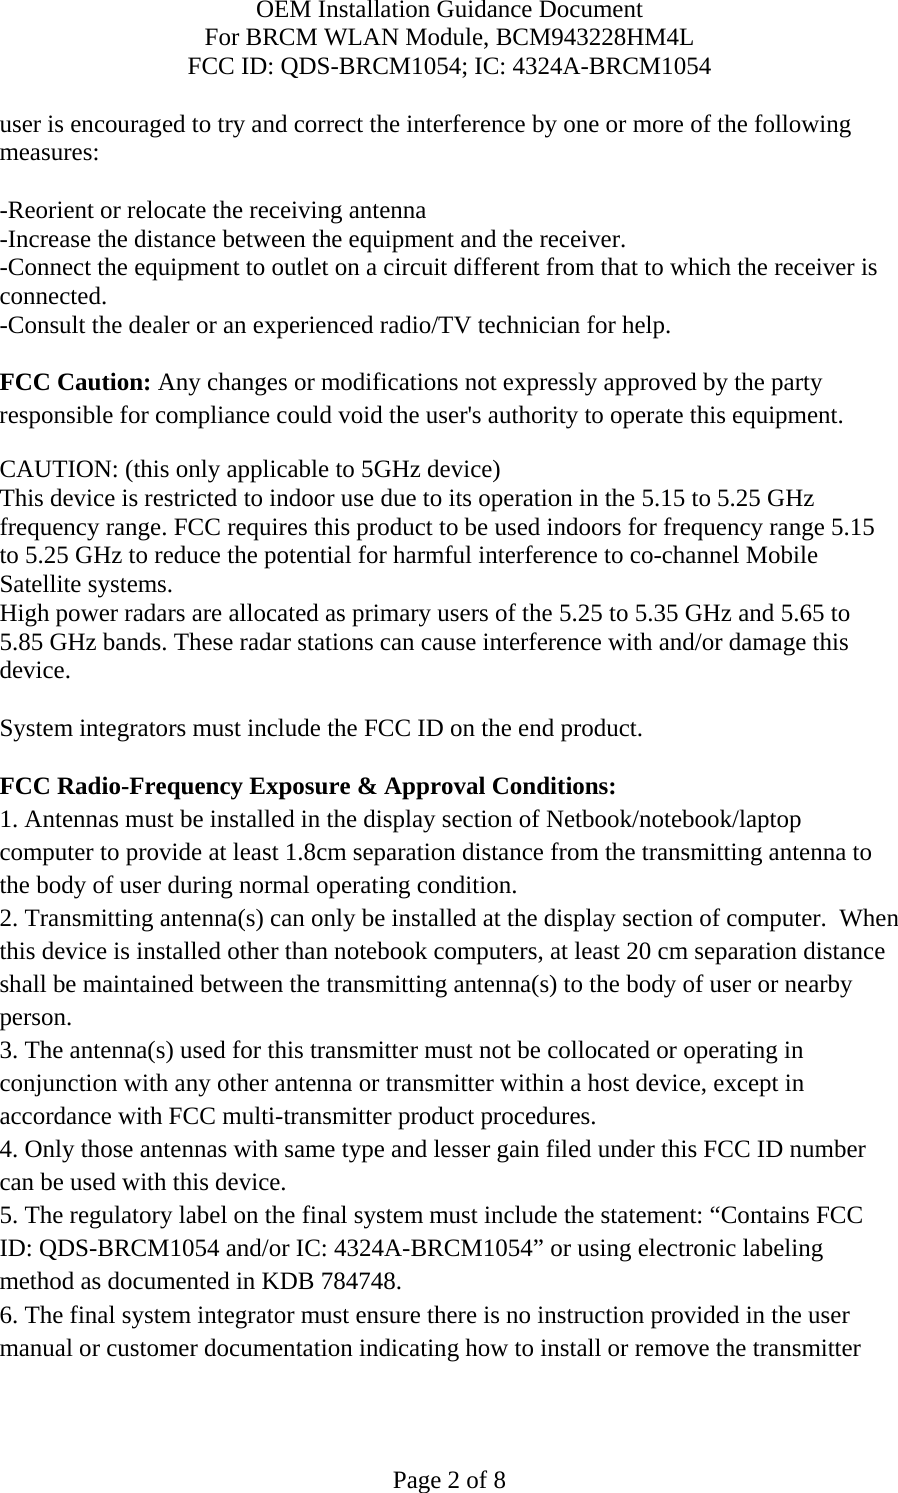 OEM Installation Guidance Document For BRCM WLAN Module, BCM943228HM4L FCC ID: QDS-BRCM1054; IC: 4324A-BRCM1054  Page 2 of 8 user is encouraged to try and correct the interference by one or more of the following measures:   -Reorient or relocate the receiving antenna -Increase the distance between the equipment and the receiver. -Connect the equipment to outlet on a circuit different from that to which the receiver is connected. -Consult the dealer or an experienced radio/TV technician for help.  FCC Caution: Any changes or modifications not expressly approved by the party responsible for compliance could void the user&apos;s authority to operate this equipment. CAUTION: (this only applicable to 5GHz device) This device is restricted to indoor use due to its operation in the 5.15 to 5.25 GHz frequency range. FCC requires this product to be used indoors for frequency range 5.15 to 5.25 GHz to reduce the potential for harmful interference to co-channel Mobile Satellite systems. High power radars are allocated as primary users of the 5.25 to 5.35 GHz and 5.65 to 5.85 GHz bands. These radar stations can cause interference with and/or damage this device.  System integrators must include the FCC ID on the end product.   FCC Radio-Frequency Exposure &amp; Approval Conditions: 1. Antennas must be installed in the display section of Netbook/notebook/laptop computer to provide at least 1.8cm separation distance from the transmitting antenna to the body of user during normal operating condition. 2. Transmitting antenna(s) can only be installed at the display section of computer.  When this device is installed other than notebook computers, at least 20 cm separation distance shall be maintained between the transmitting antenna(s) to the body of user or nearby person. 3. The antenna(s) used for this transmitter must not be collocated or operating in conjunction with any other antenna or transmitter within a host device, except in accordance with FCC multi-transmitter product procedures. 4. Only those antennas with same type and lesser gain filed under this FCC ID number can be used with this device. 5. The regulatory label on the final system must include the statement: “Contains FCC ID: QDS-BRCM1054 and/or IC: 4324A-BRCM1054” or using electronic labeling method as documented in KDB 784748. 6. The final system integrator must ensure there is no instruction provided in the user manual or customer documentation indicating how to install or remove the transmitter 